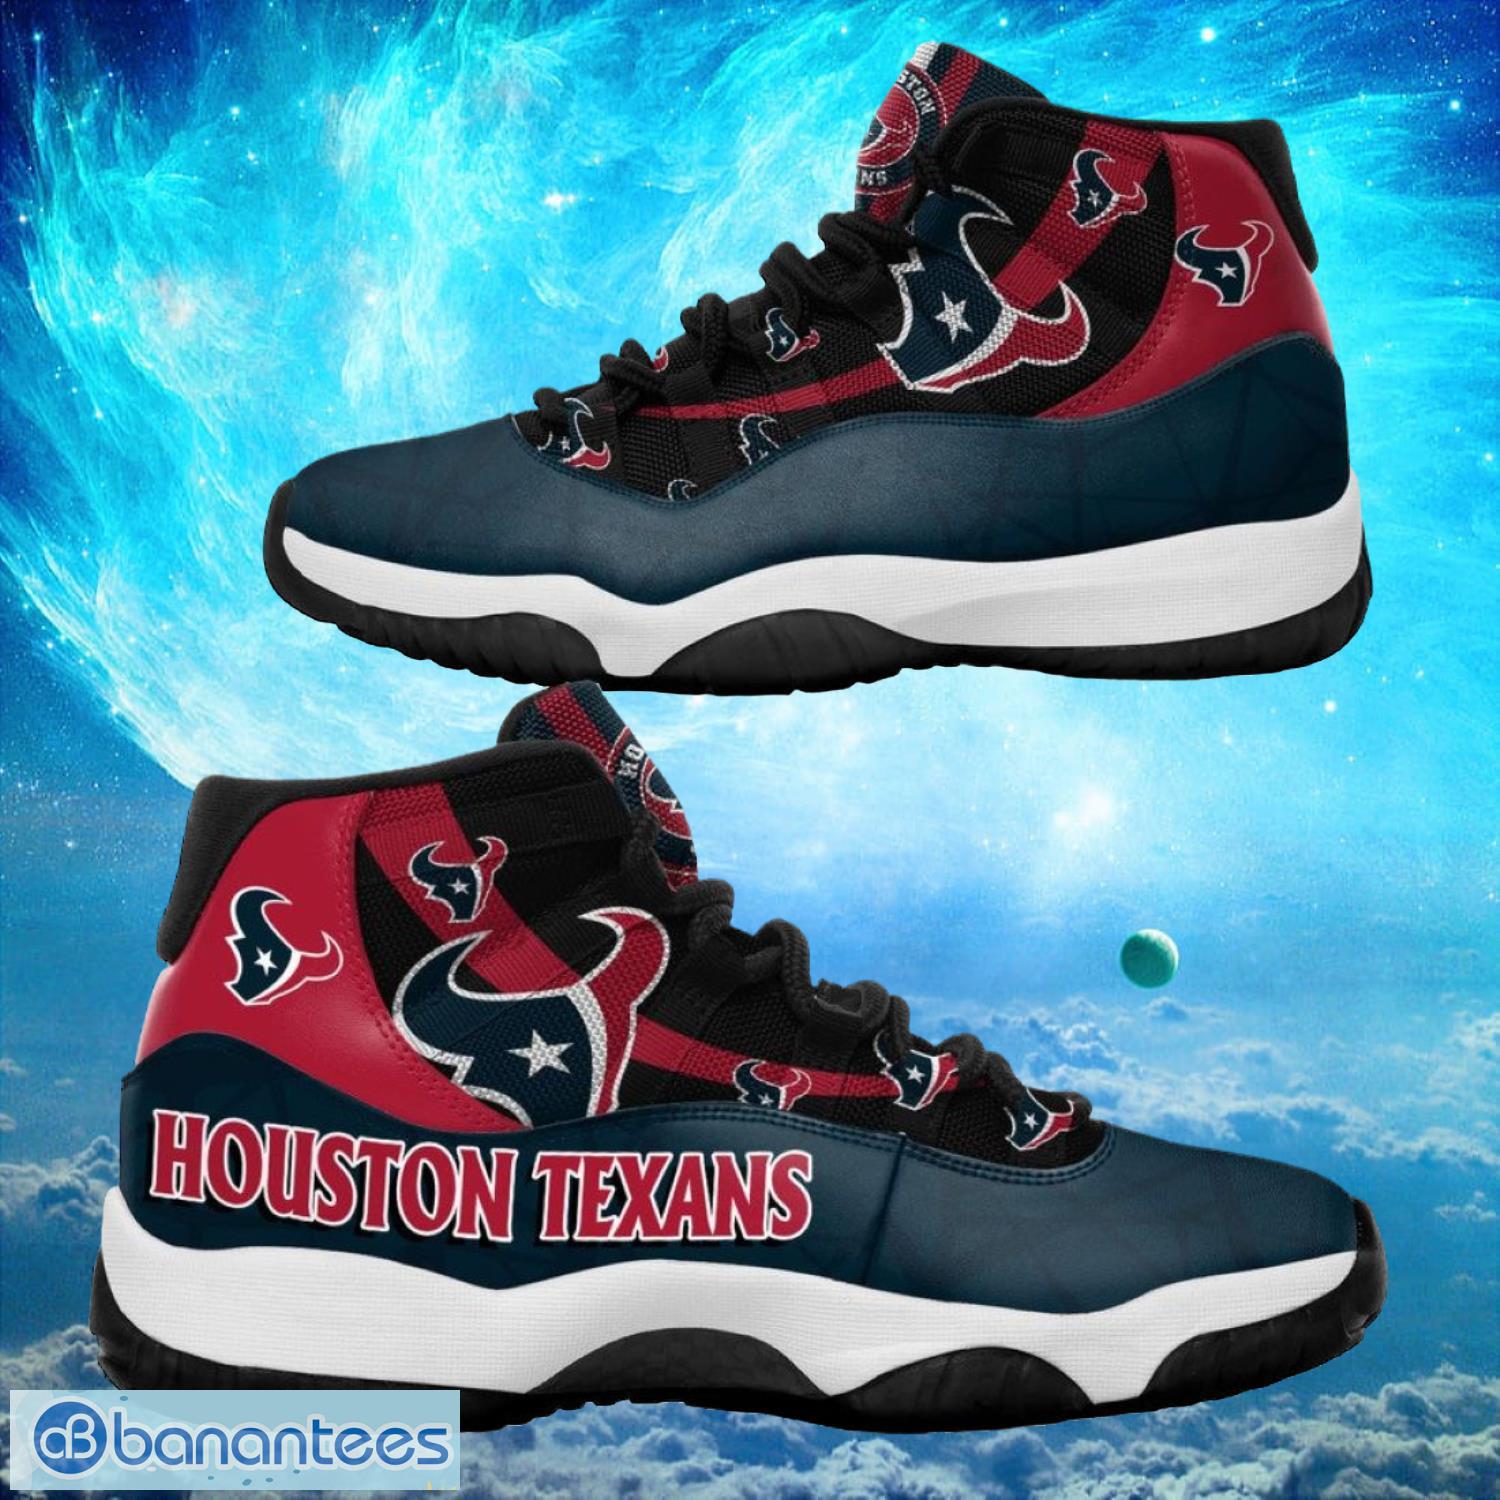 Houston Texans NFL Air Jordan 11 Sneakers Shoes Gift For Fans Product Photo 1